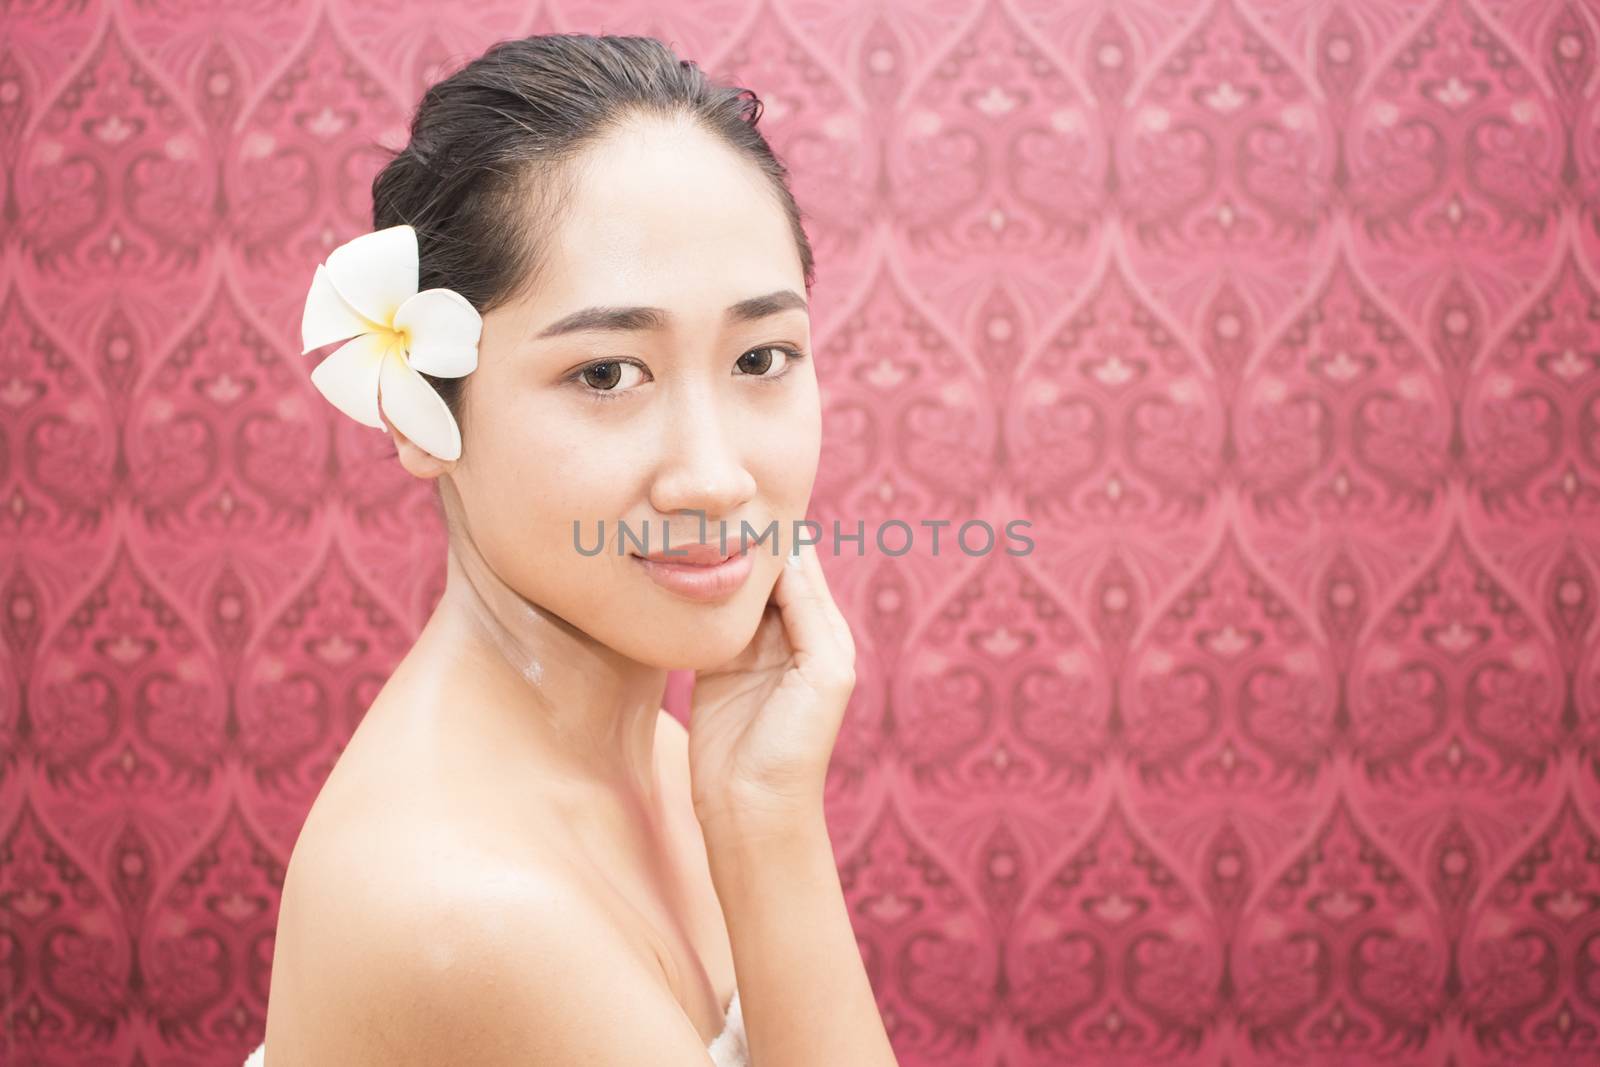 Beauty Spa Woman with perfect skin Portrait.